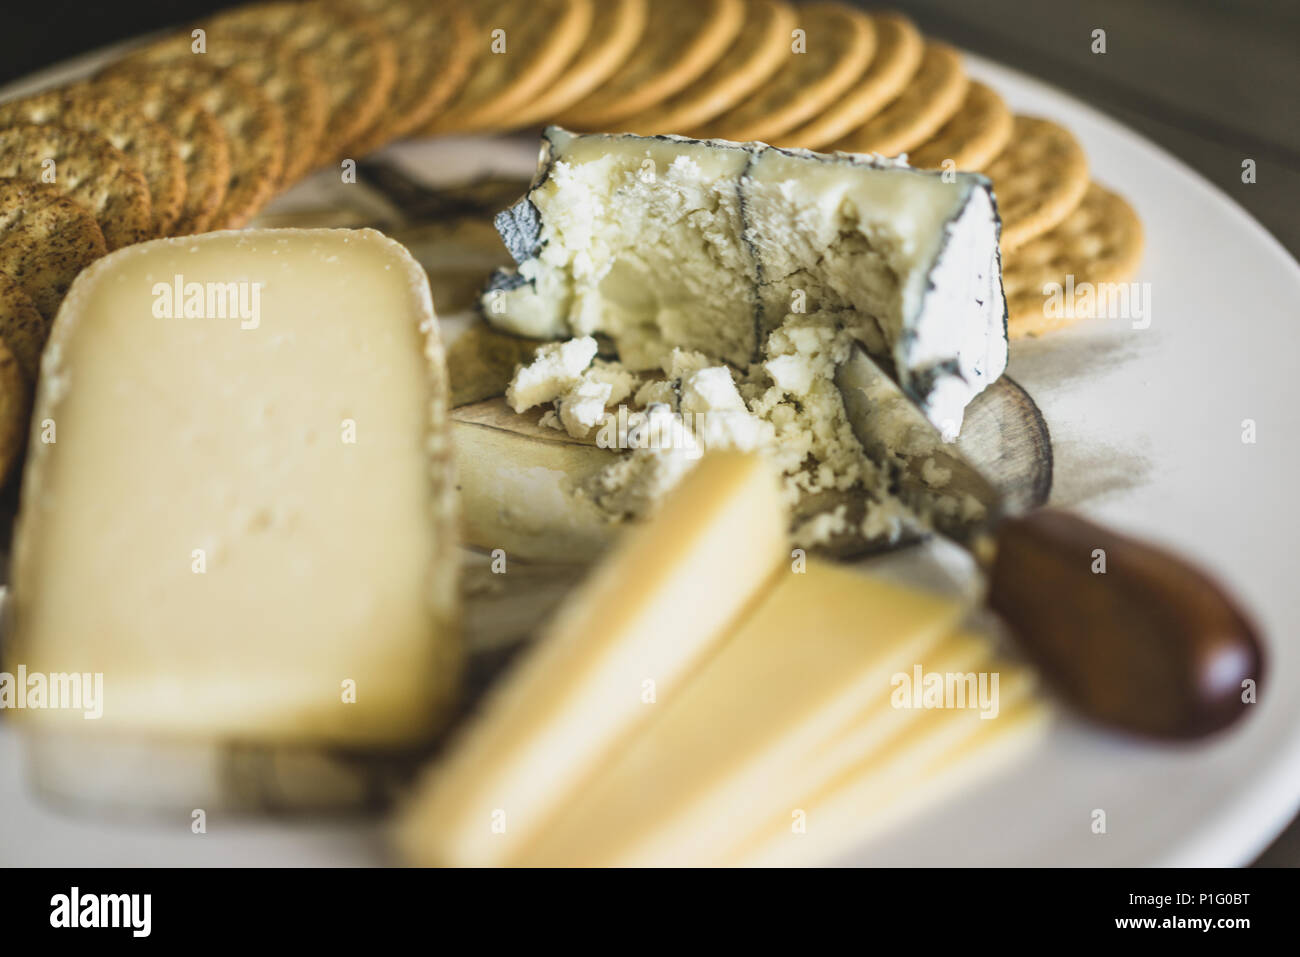 cheese board with various cheeses Stock Photo